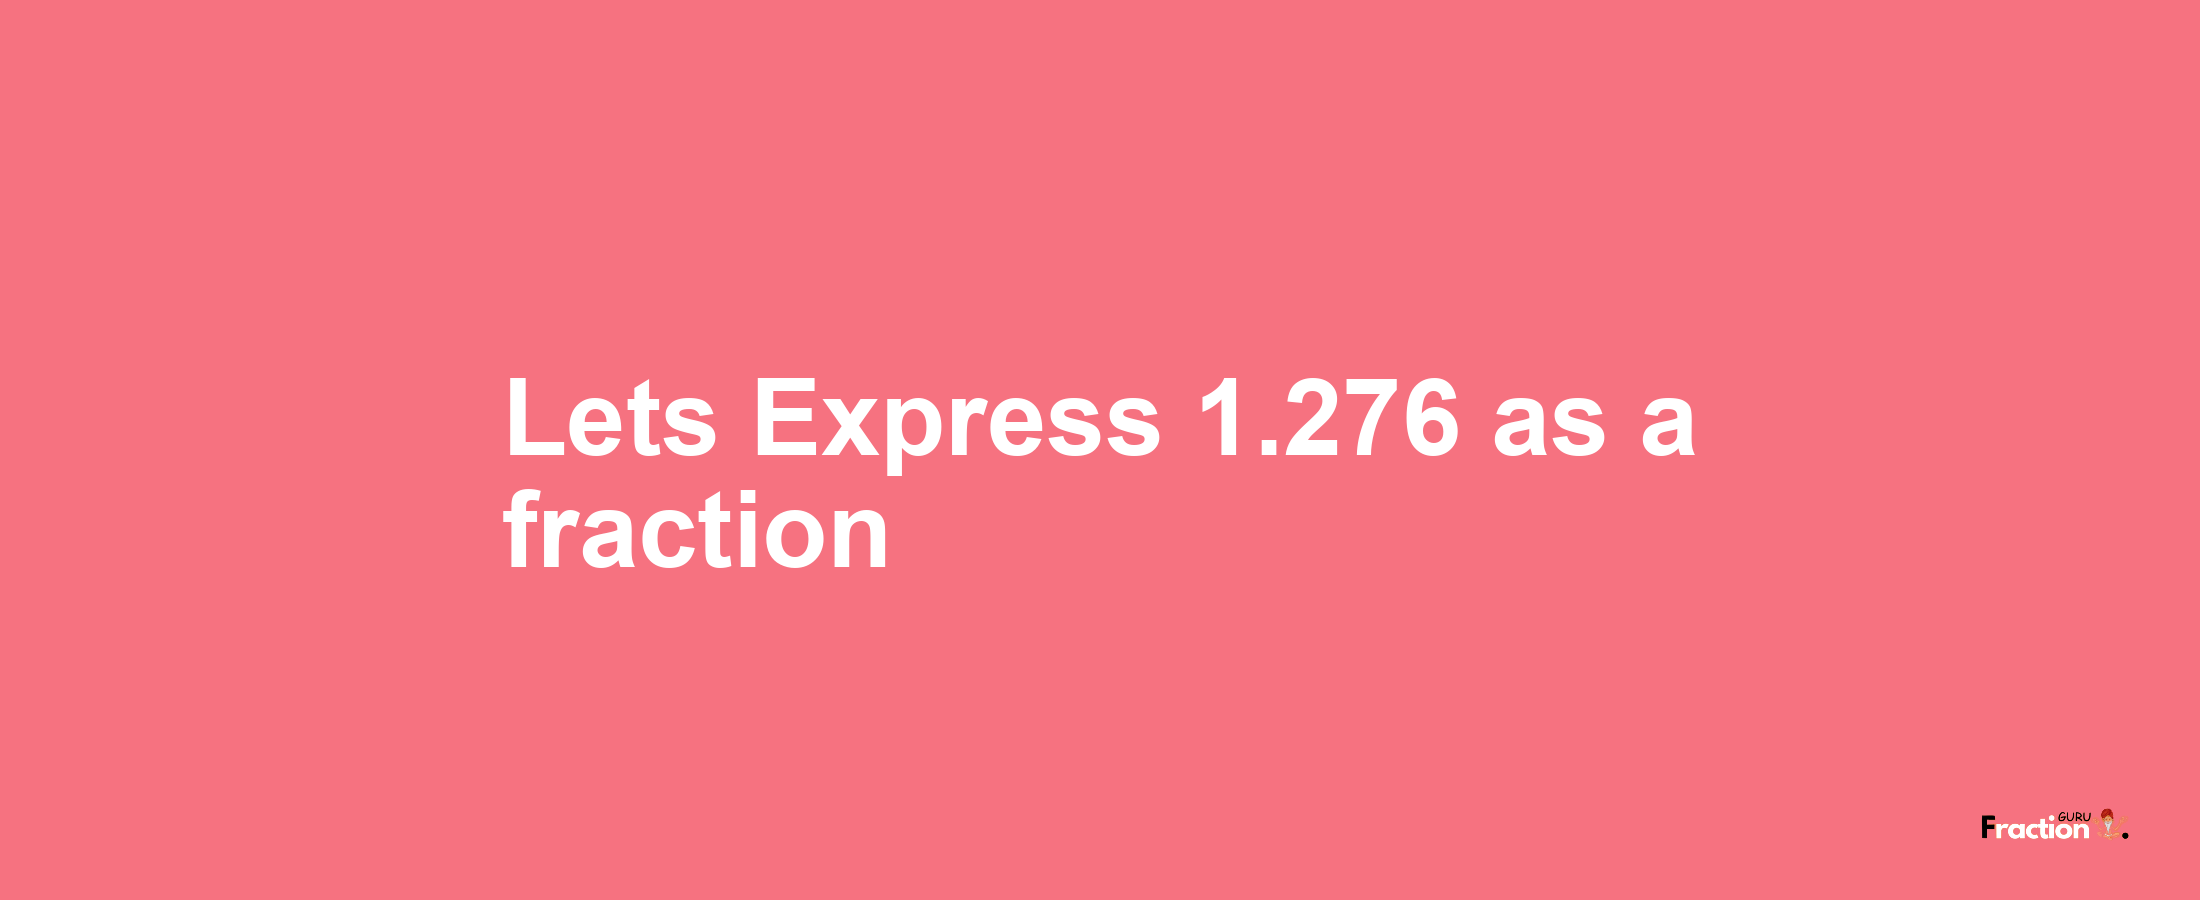 Lets Express 1.276 as afraction